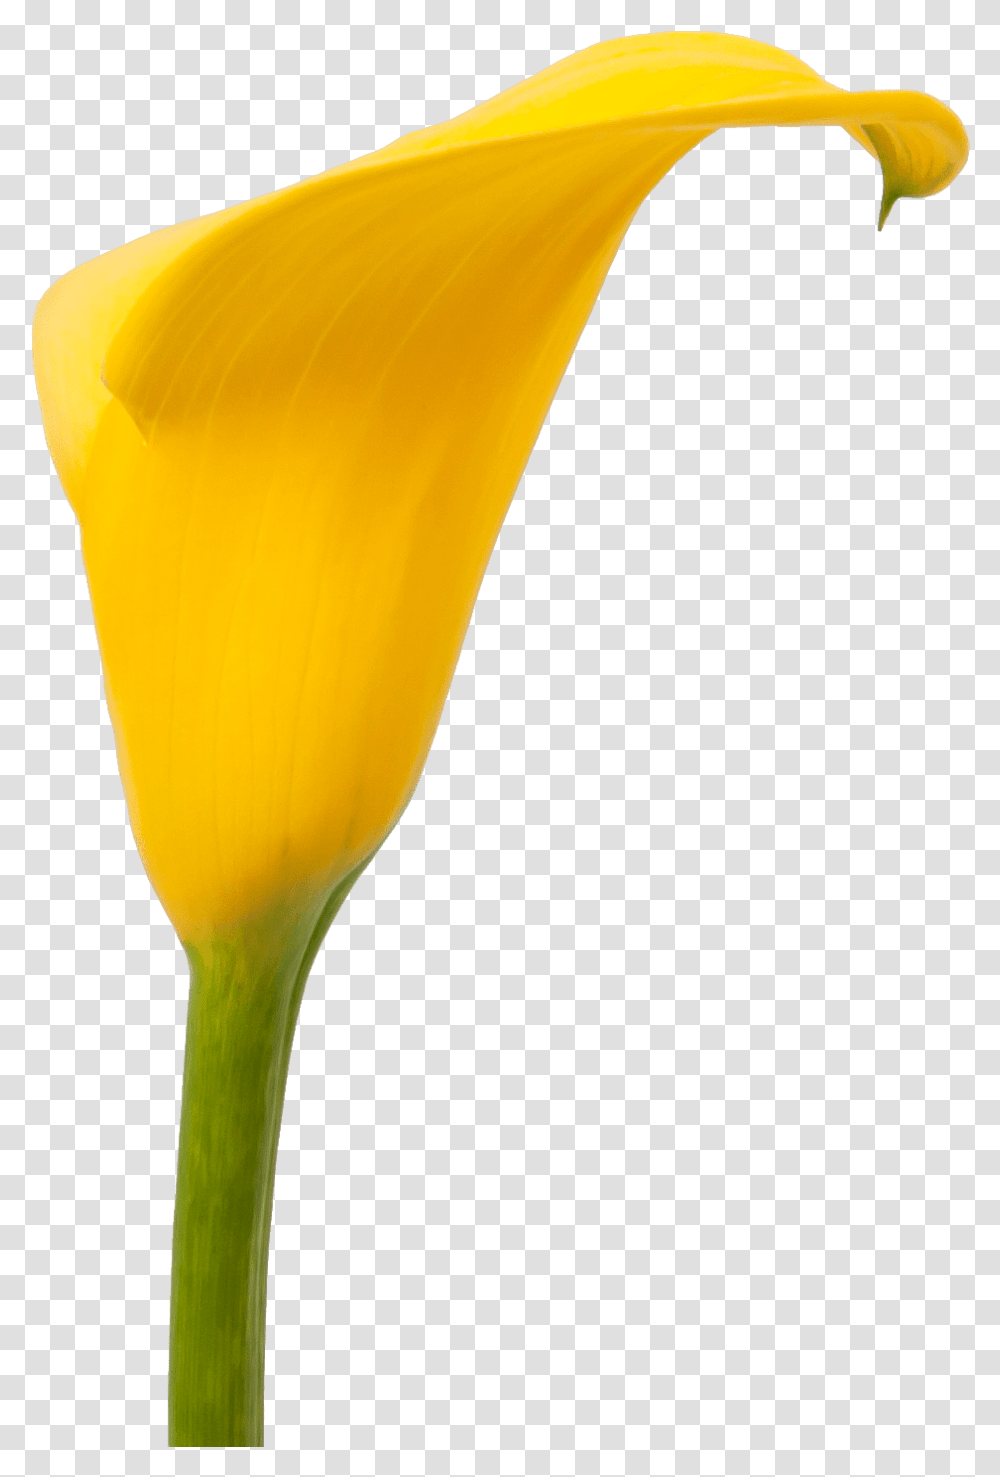 Download Calla Florex Gold Giant White Arum Lily Full, Plant, Flower, Blossom, Petal Transparent Png